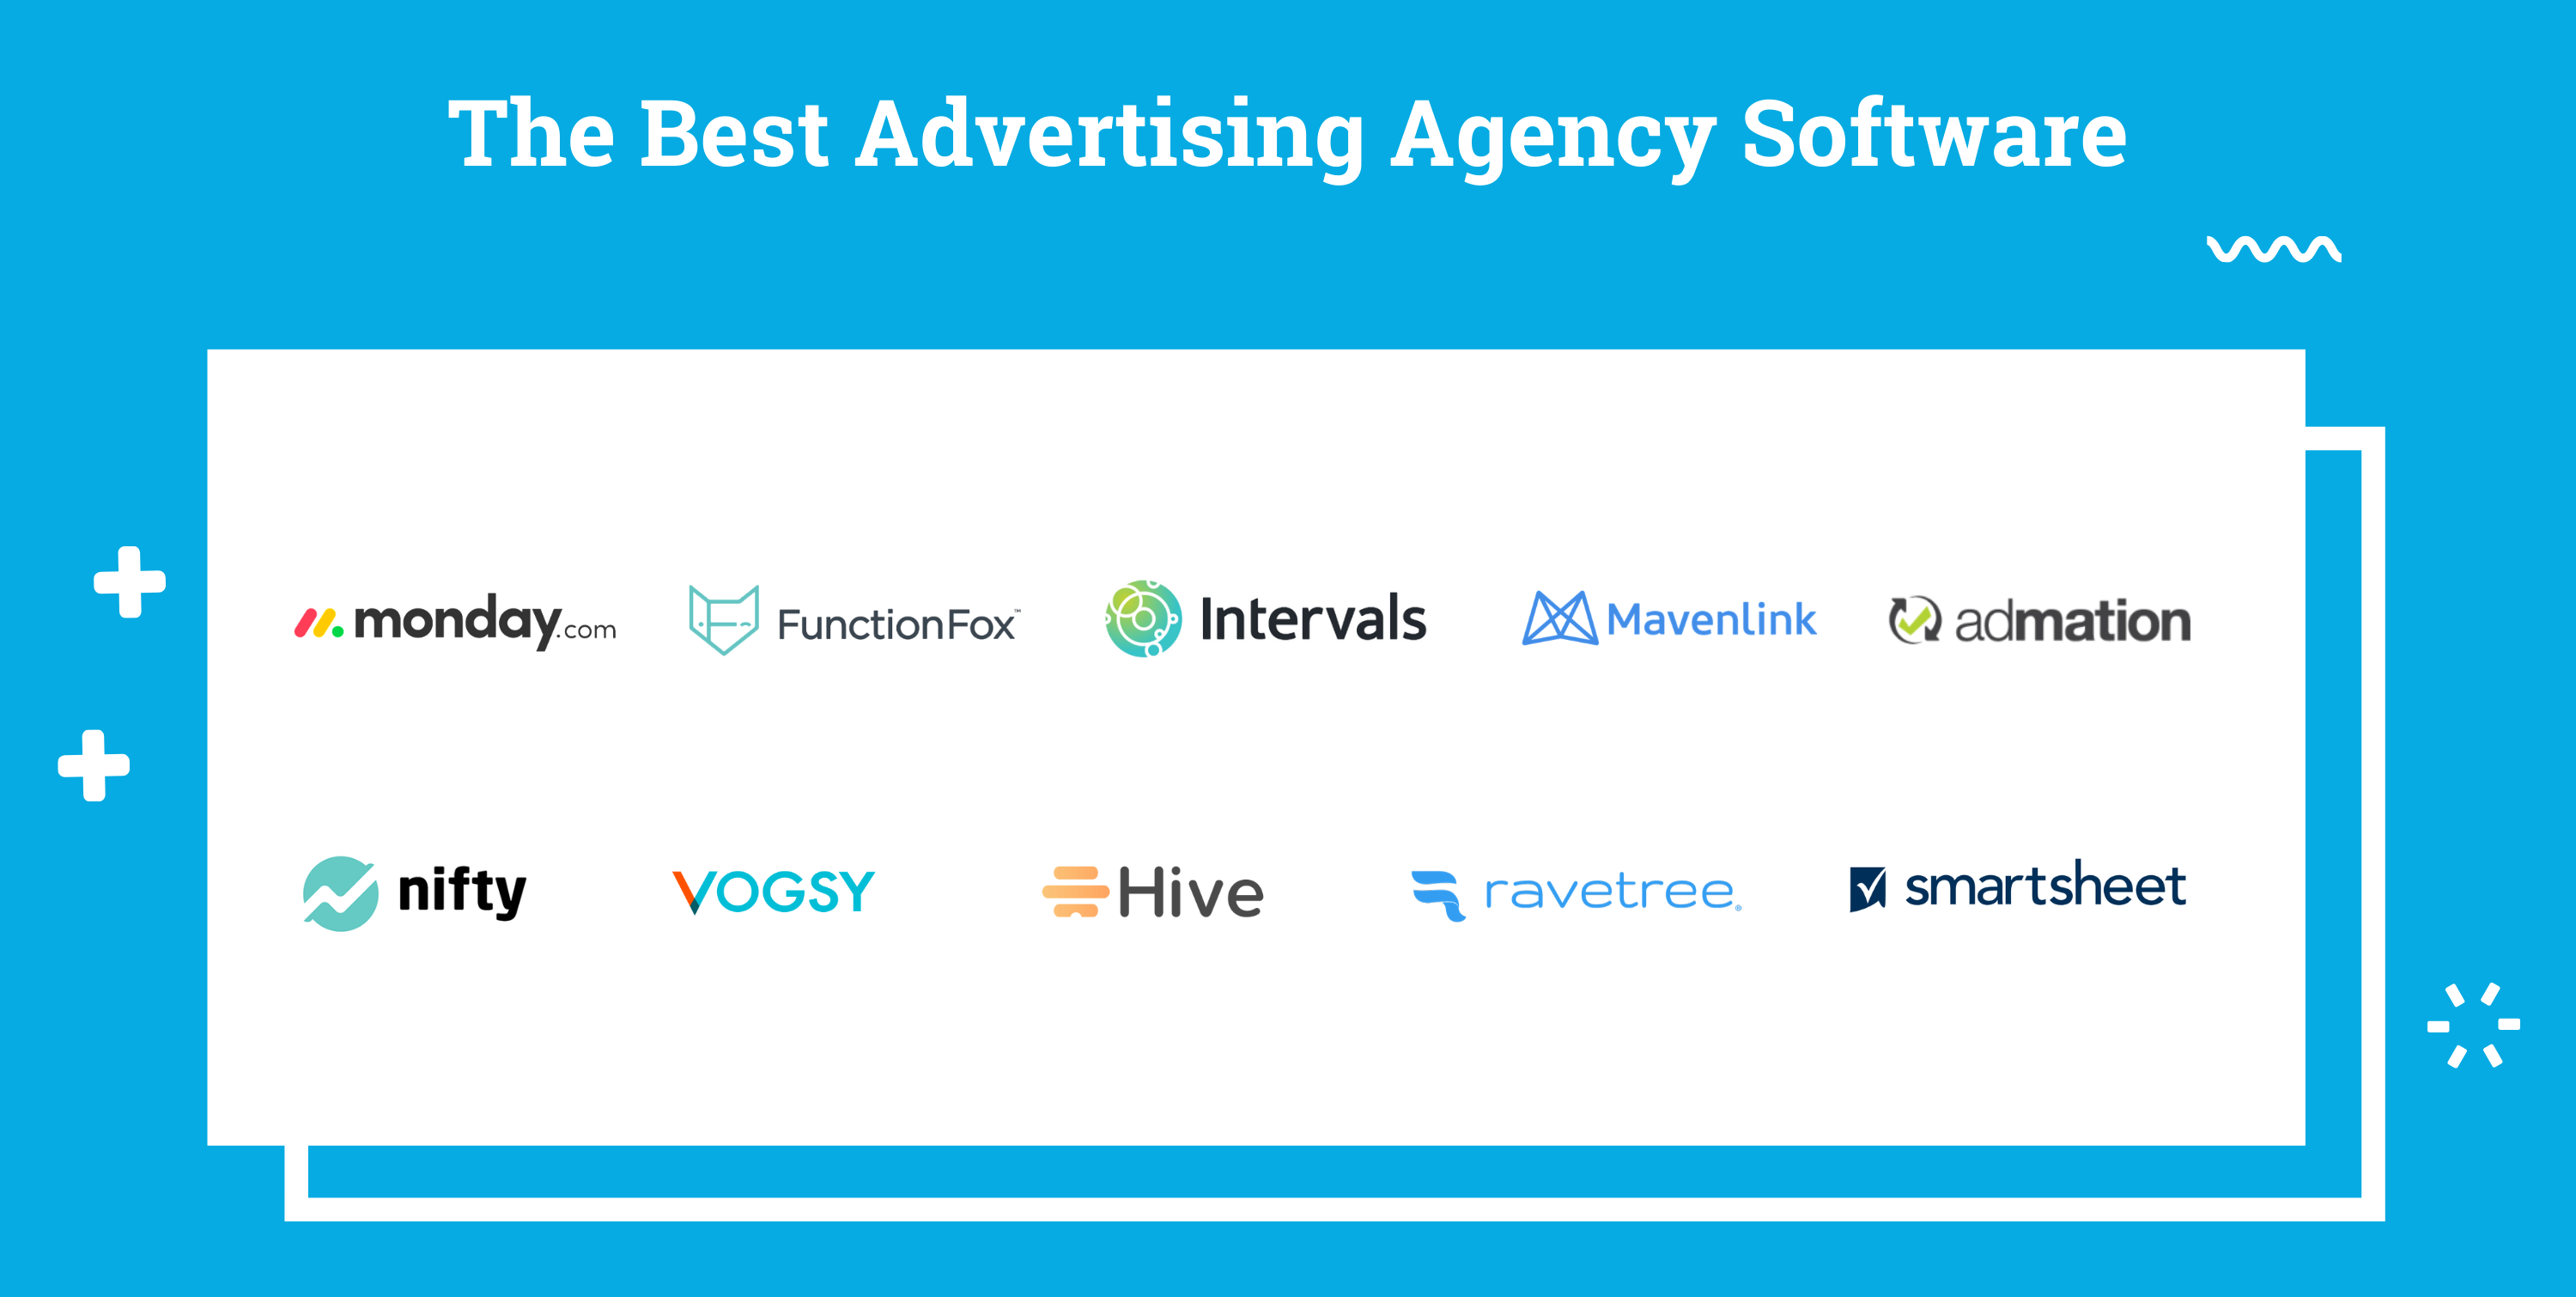 Advertising agency software